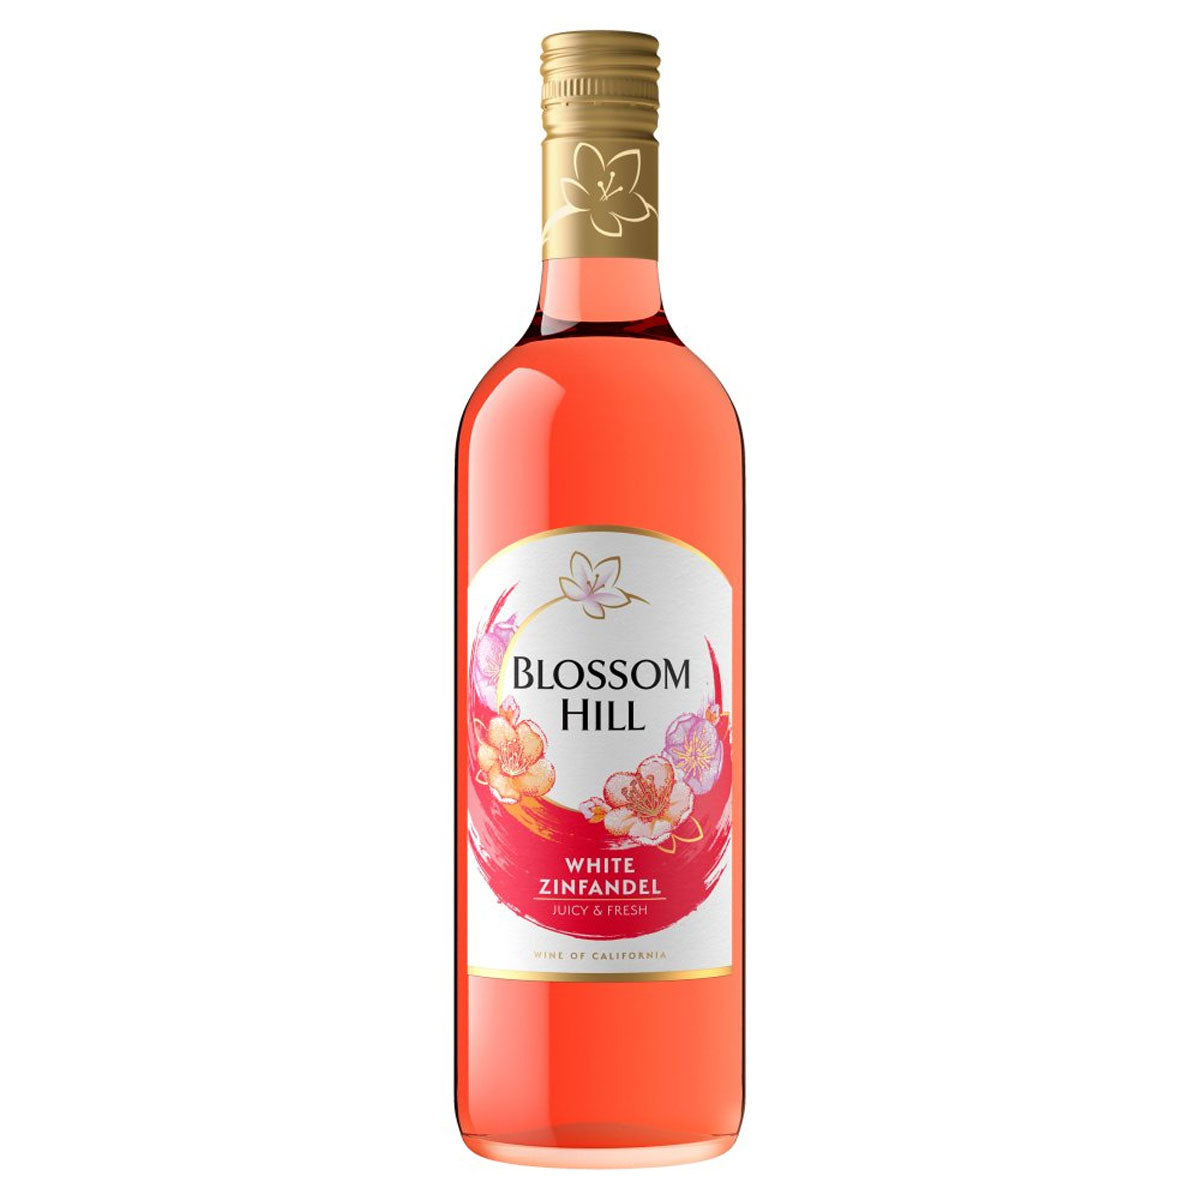 A bottle of Blossom Hill - White Zinfandel (10% ABV) - 750ml on a white background.